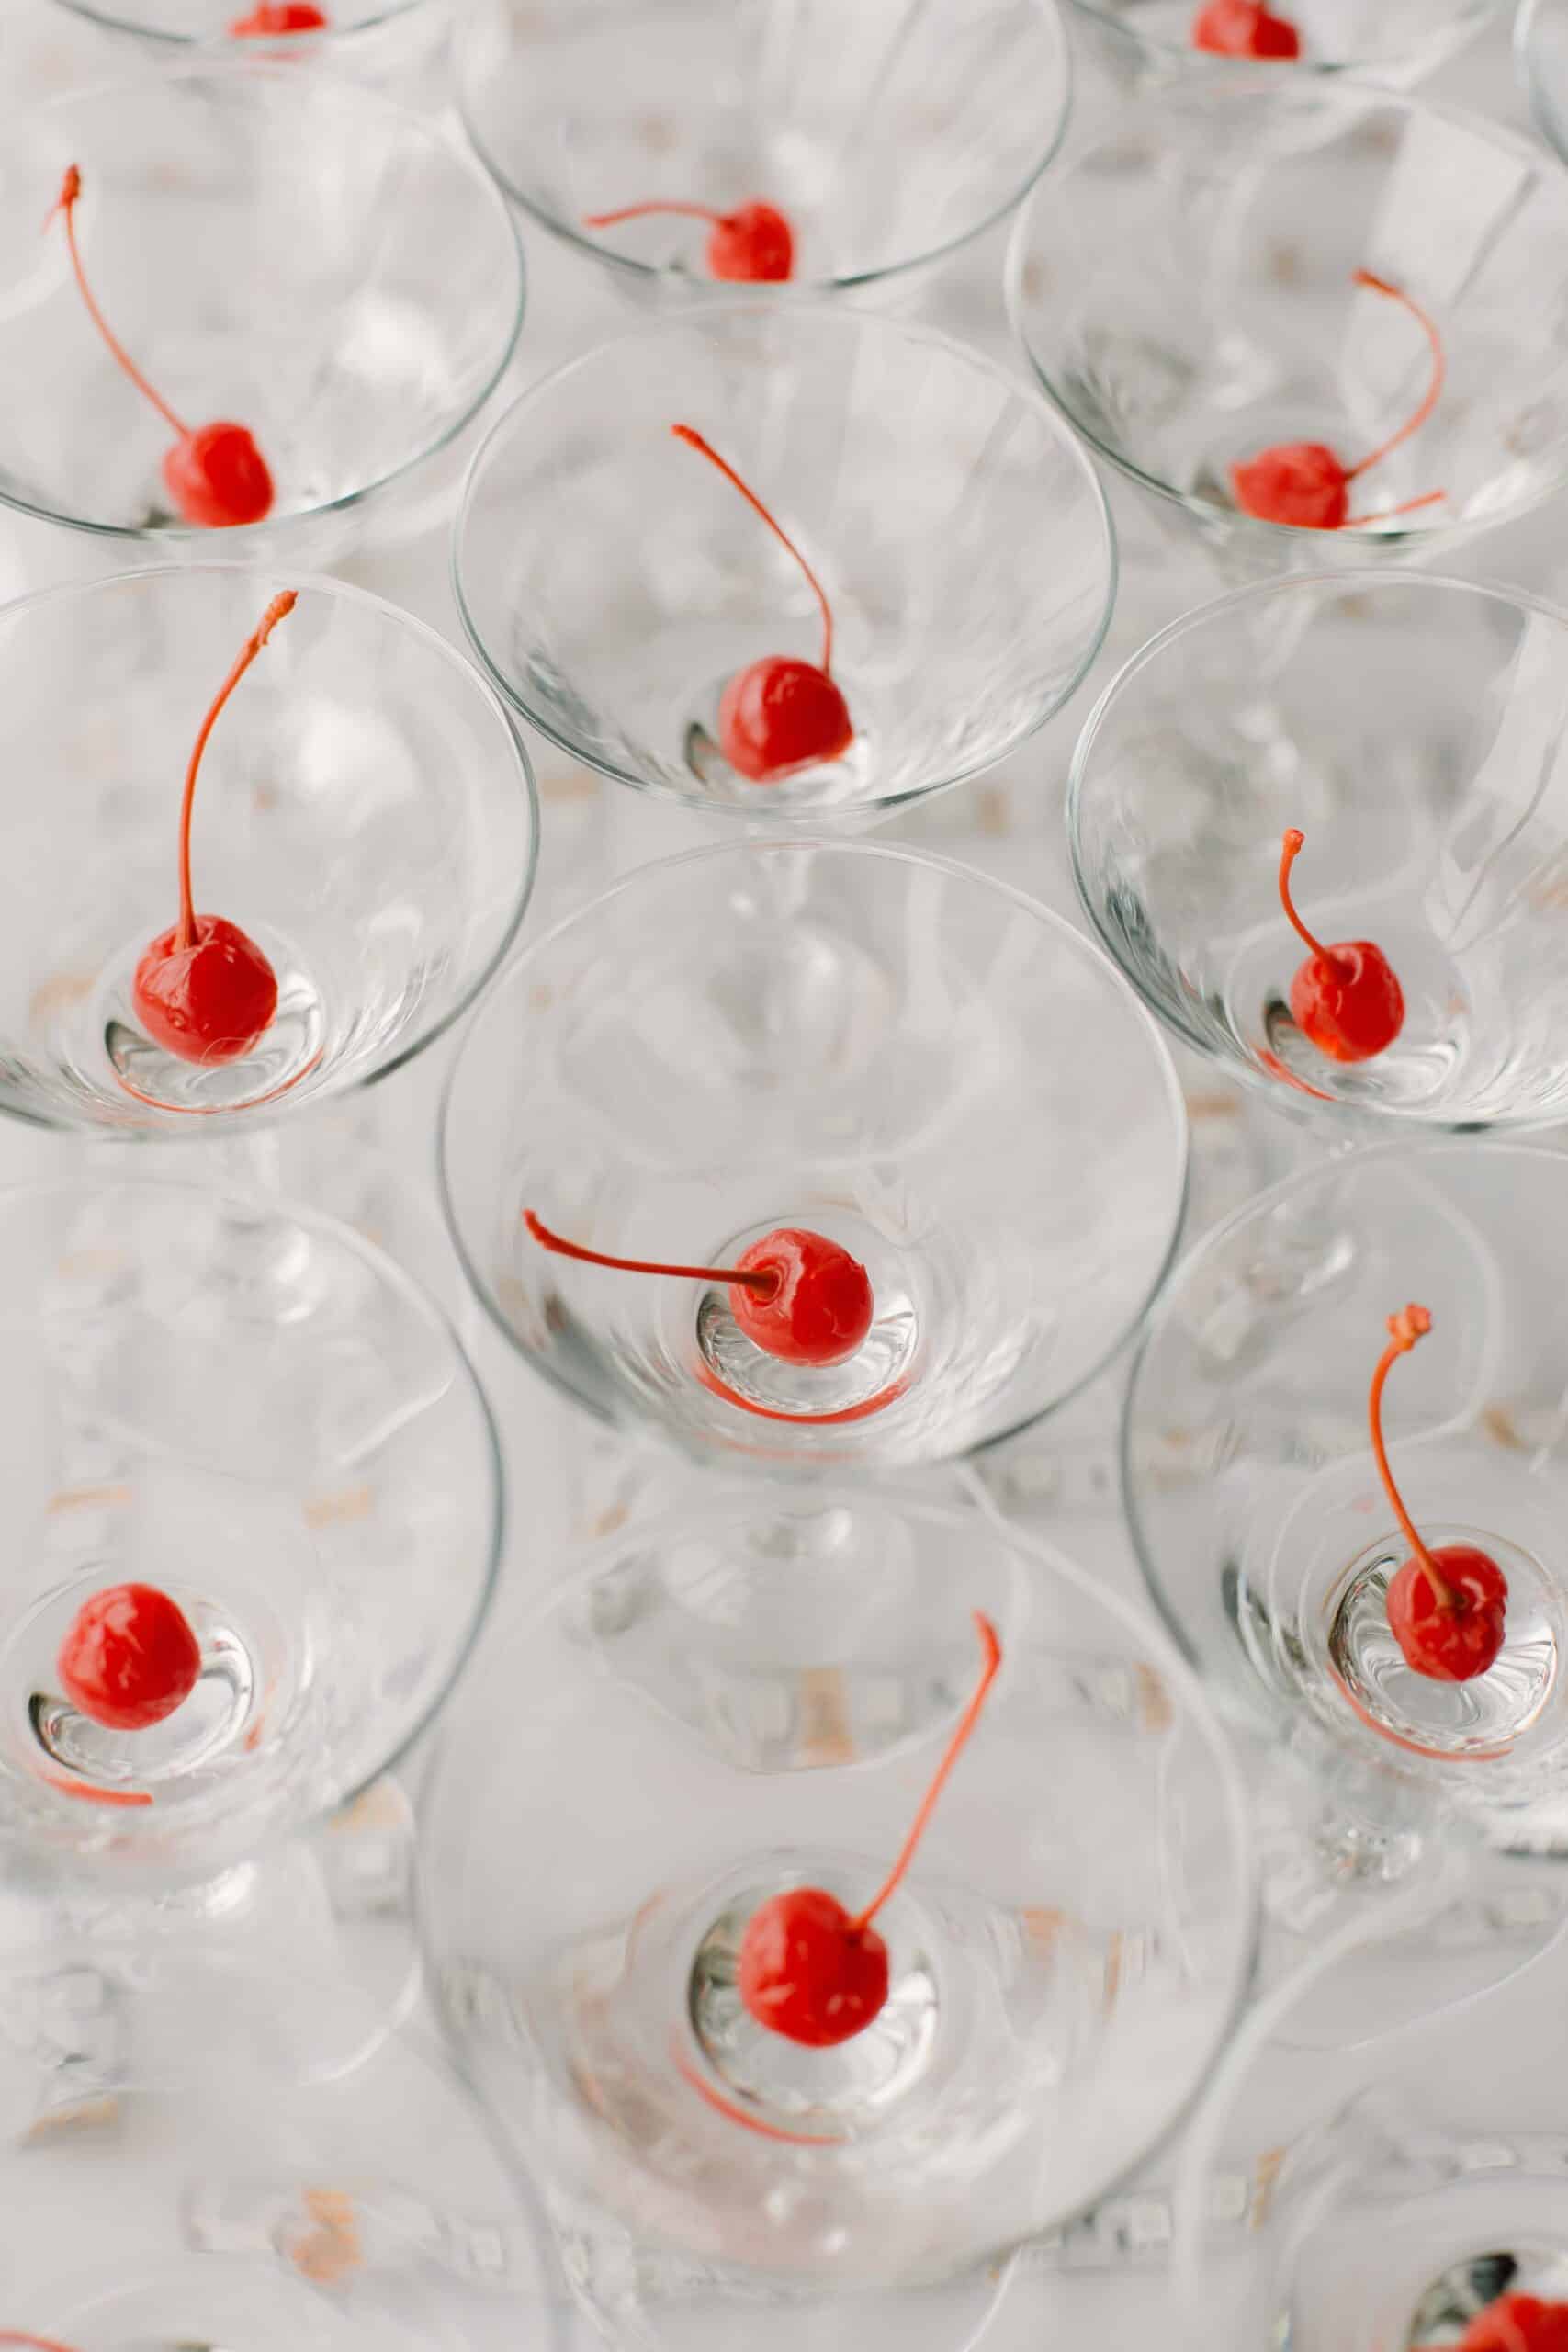 Event Planning Trends Photo by Kseniia Lopyreva: https://www.pexels.com/photo/refreshing-alcoholic-drinks-with-cherries-served-on-white-table-4959831/